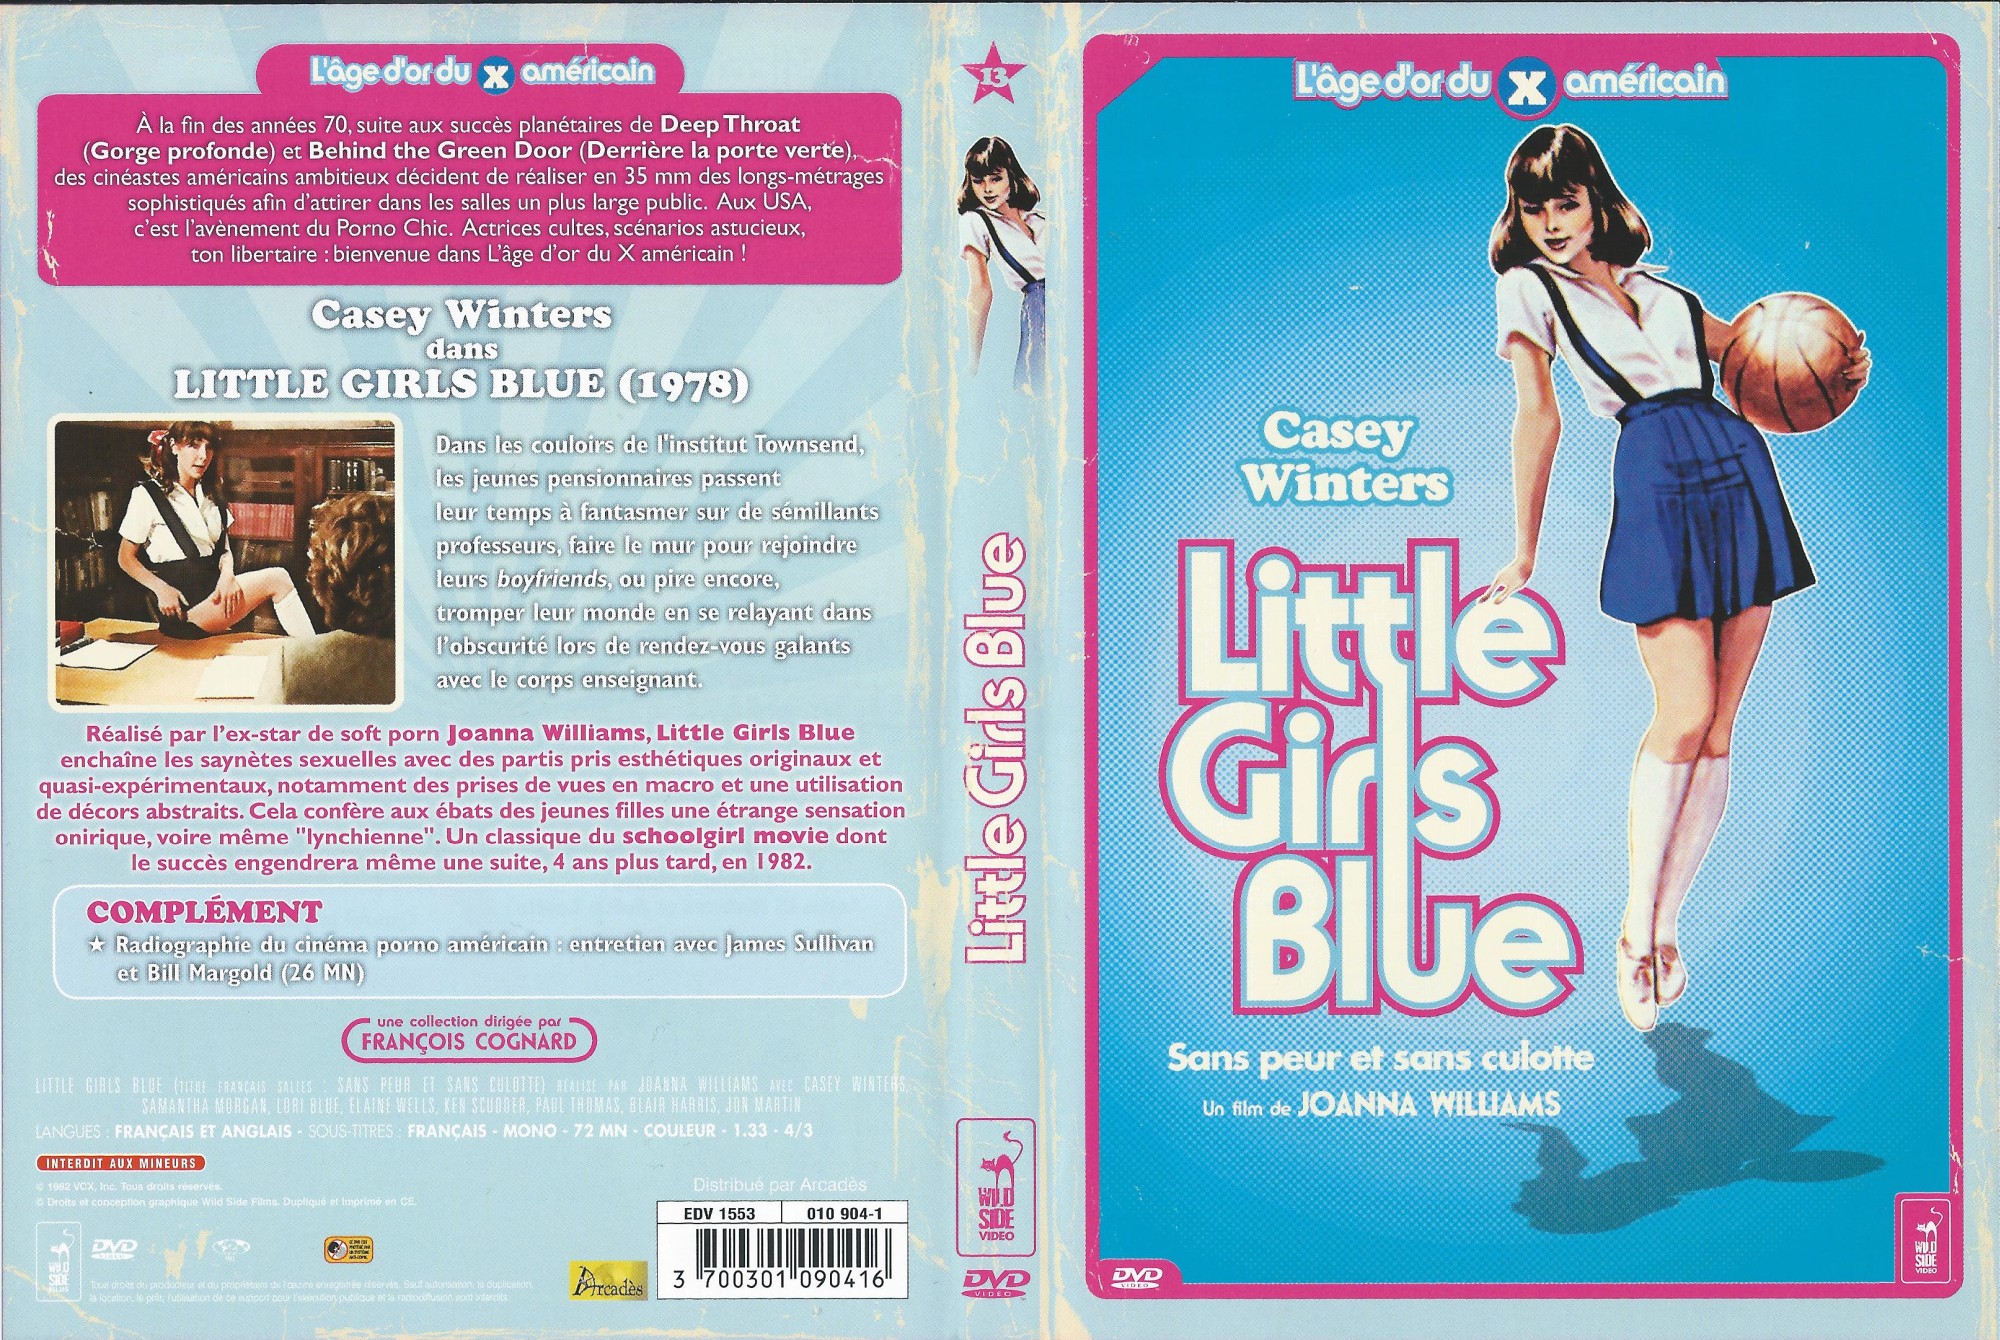 4. How to Dye Your Little Girl's Hair Blue - wide 7